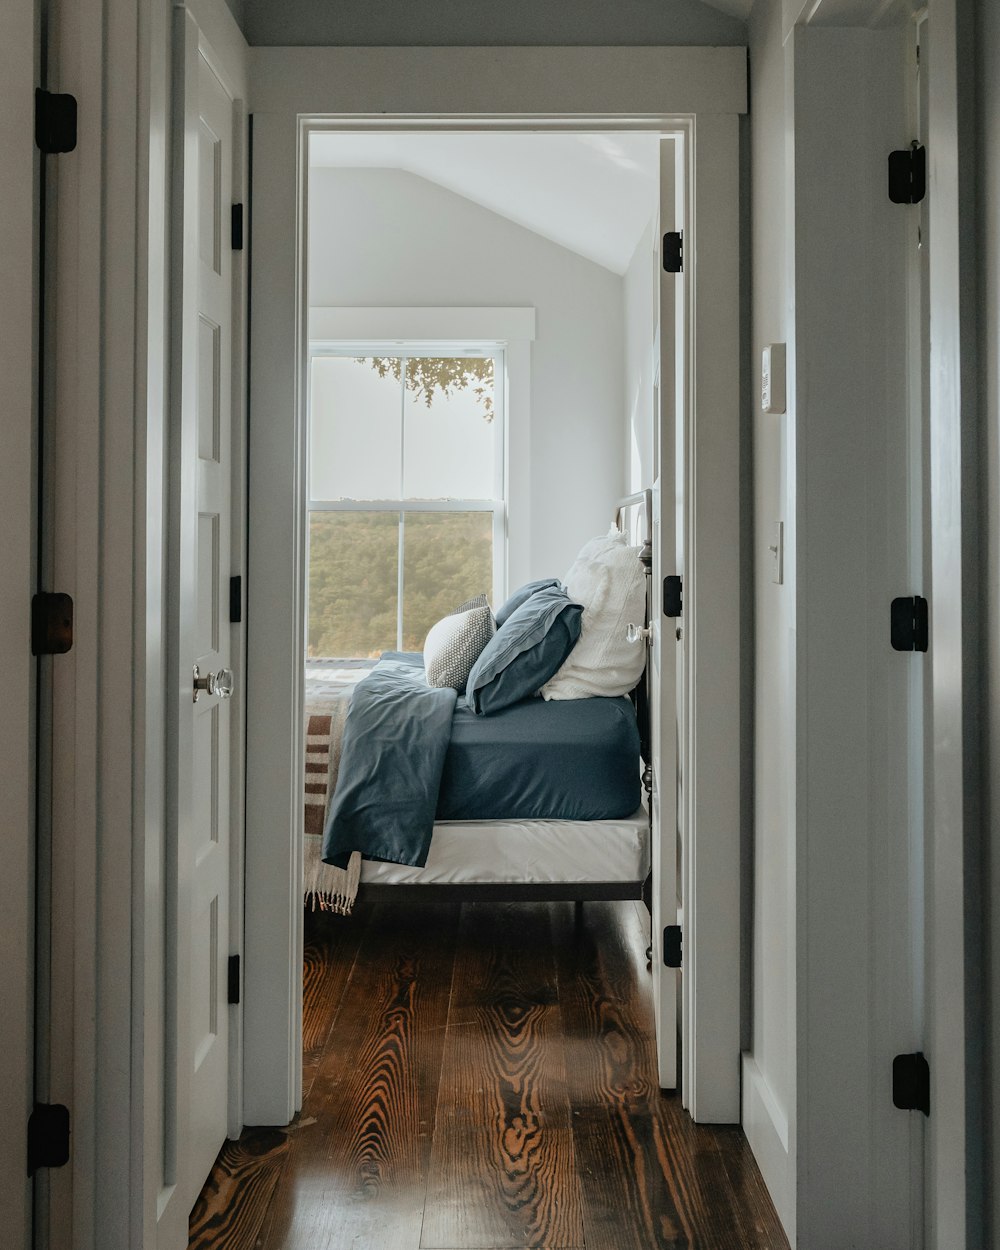 a bed sitting in a bedroom next to a doorway